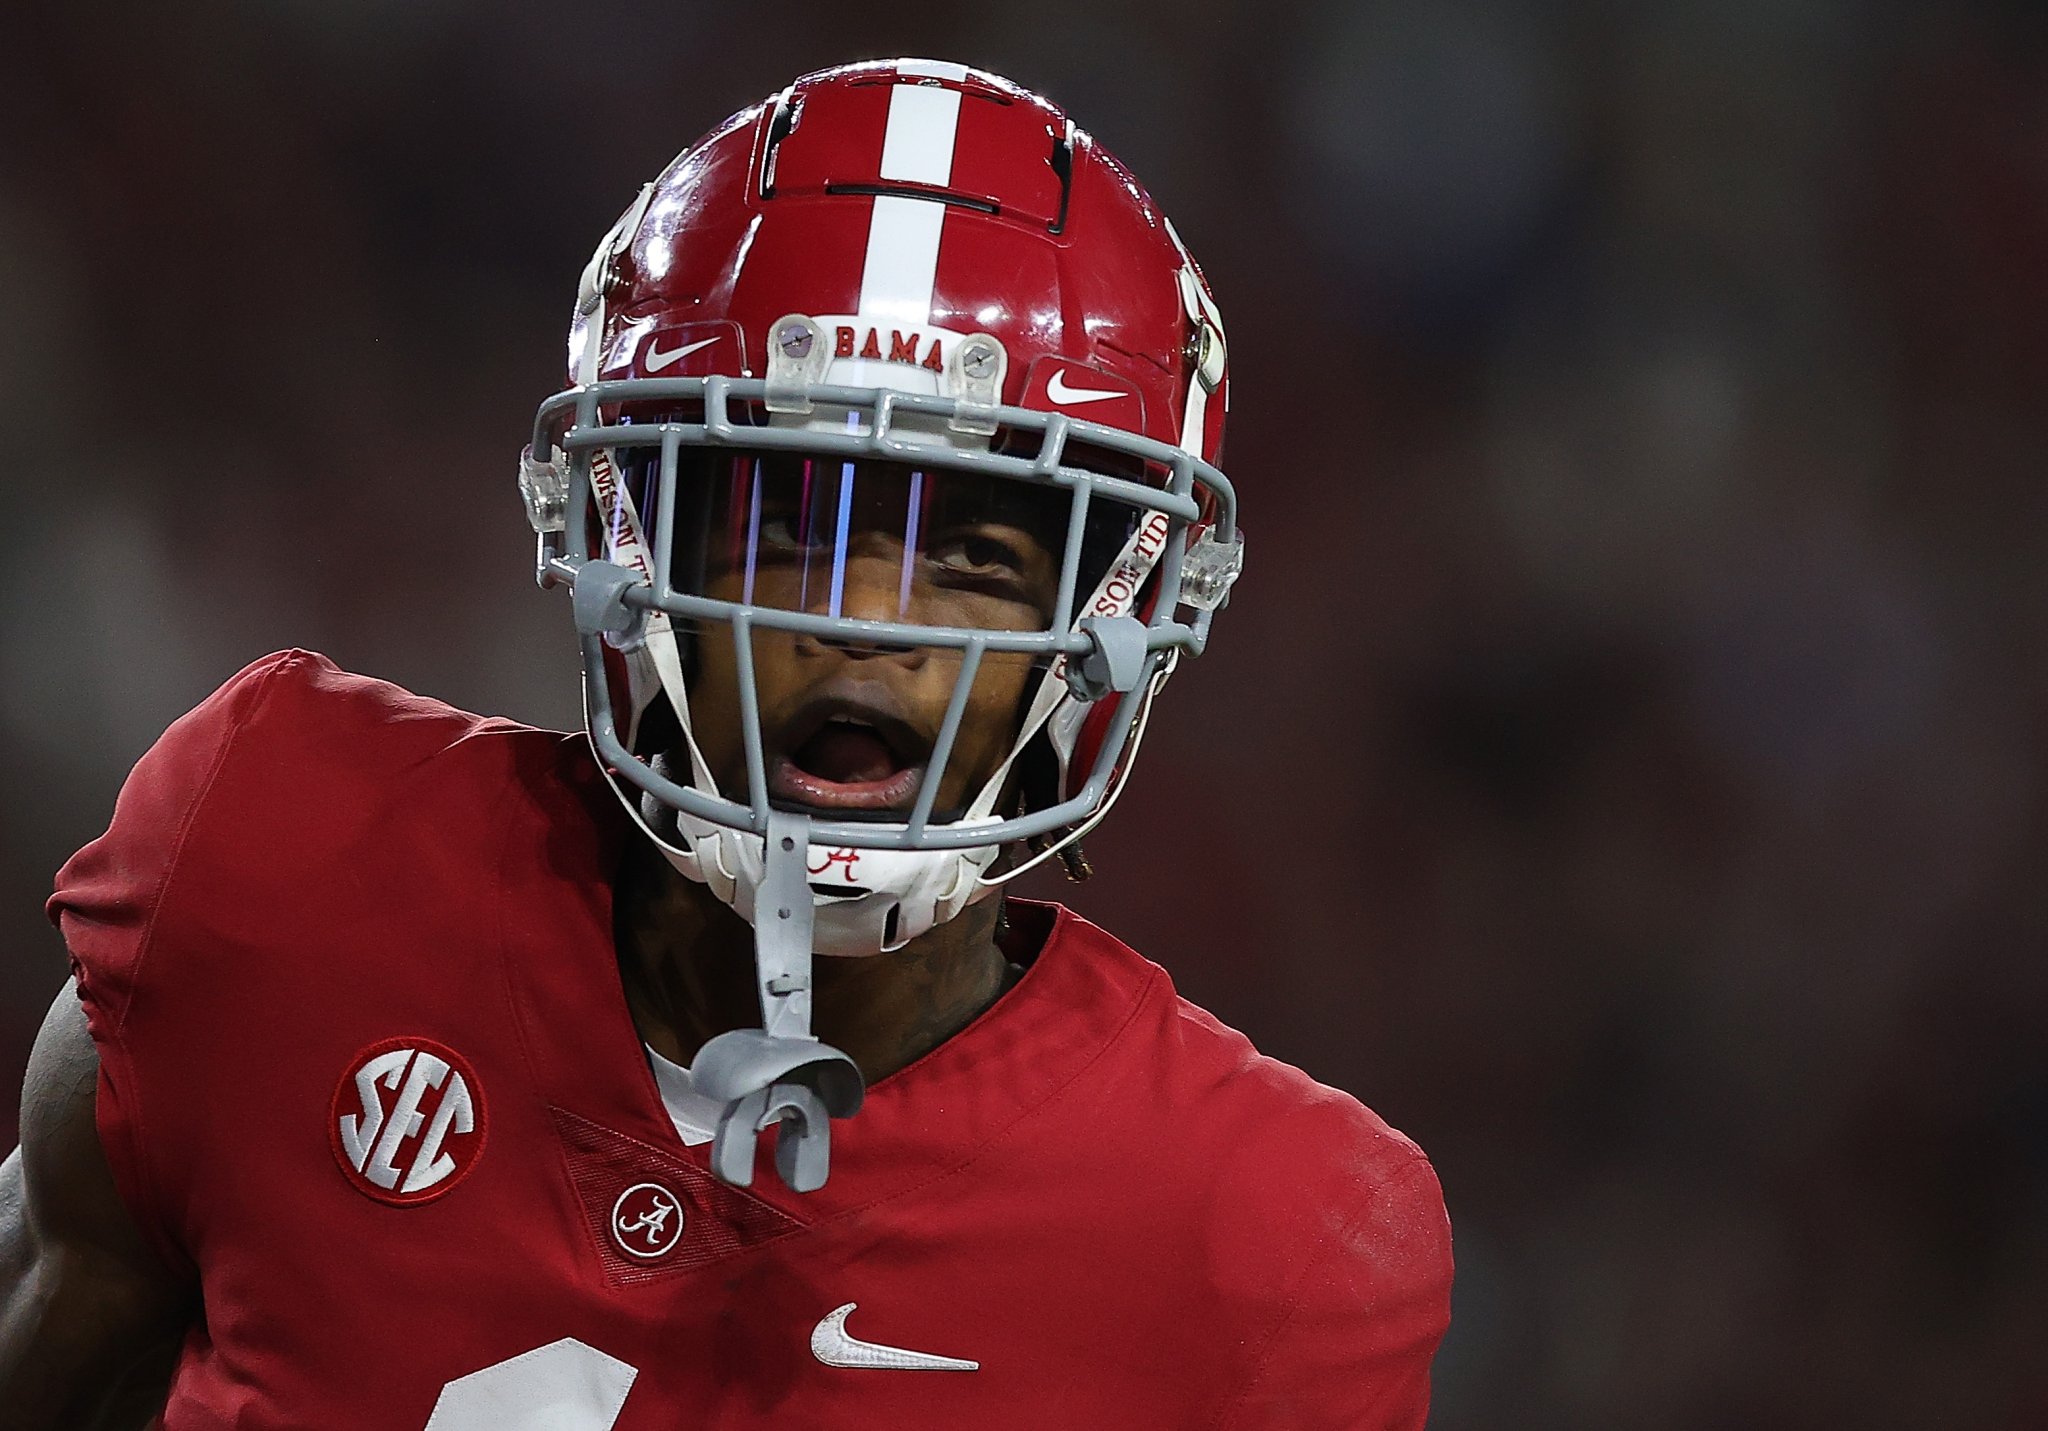 Alabama's Top Receiver, Jameson Williams, Ejected For Targeting